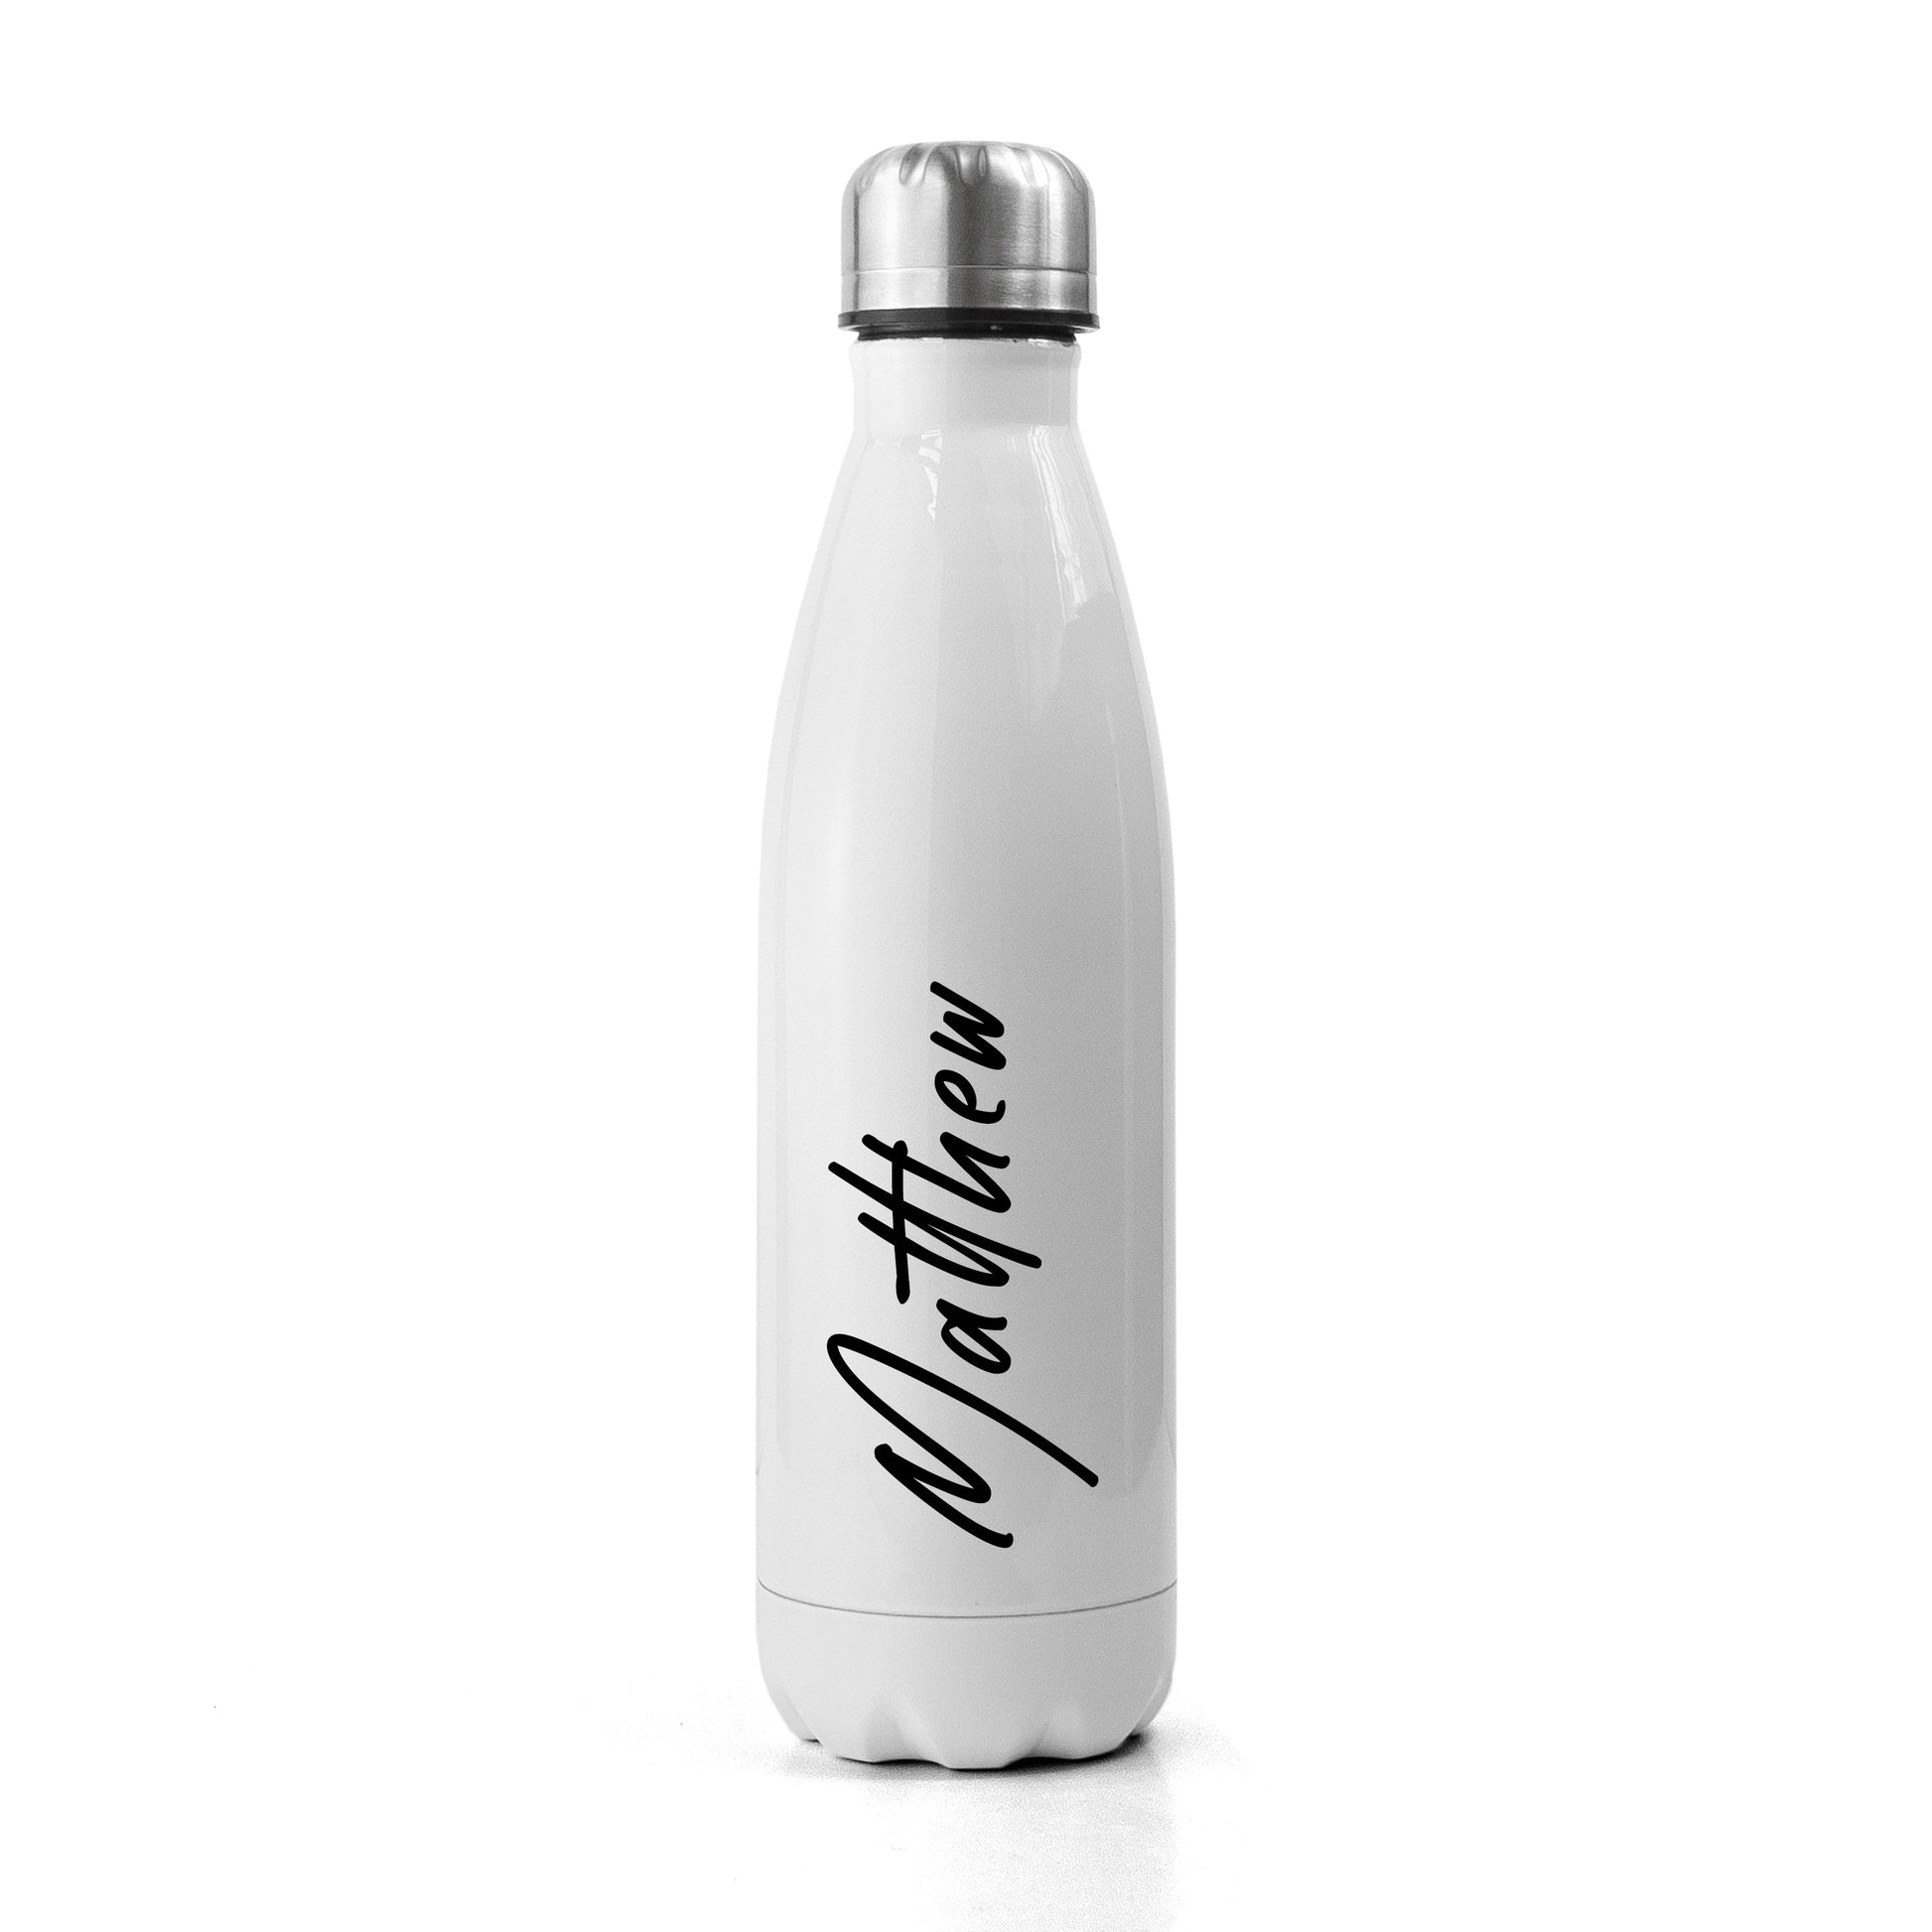 Personalized Water Bottles - Personalized White Water Bottle 